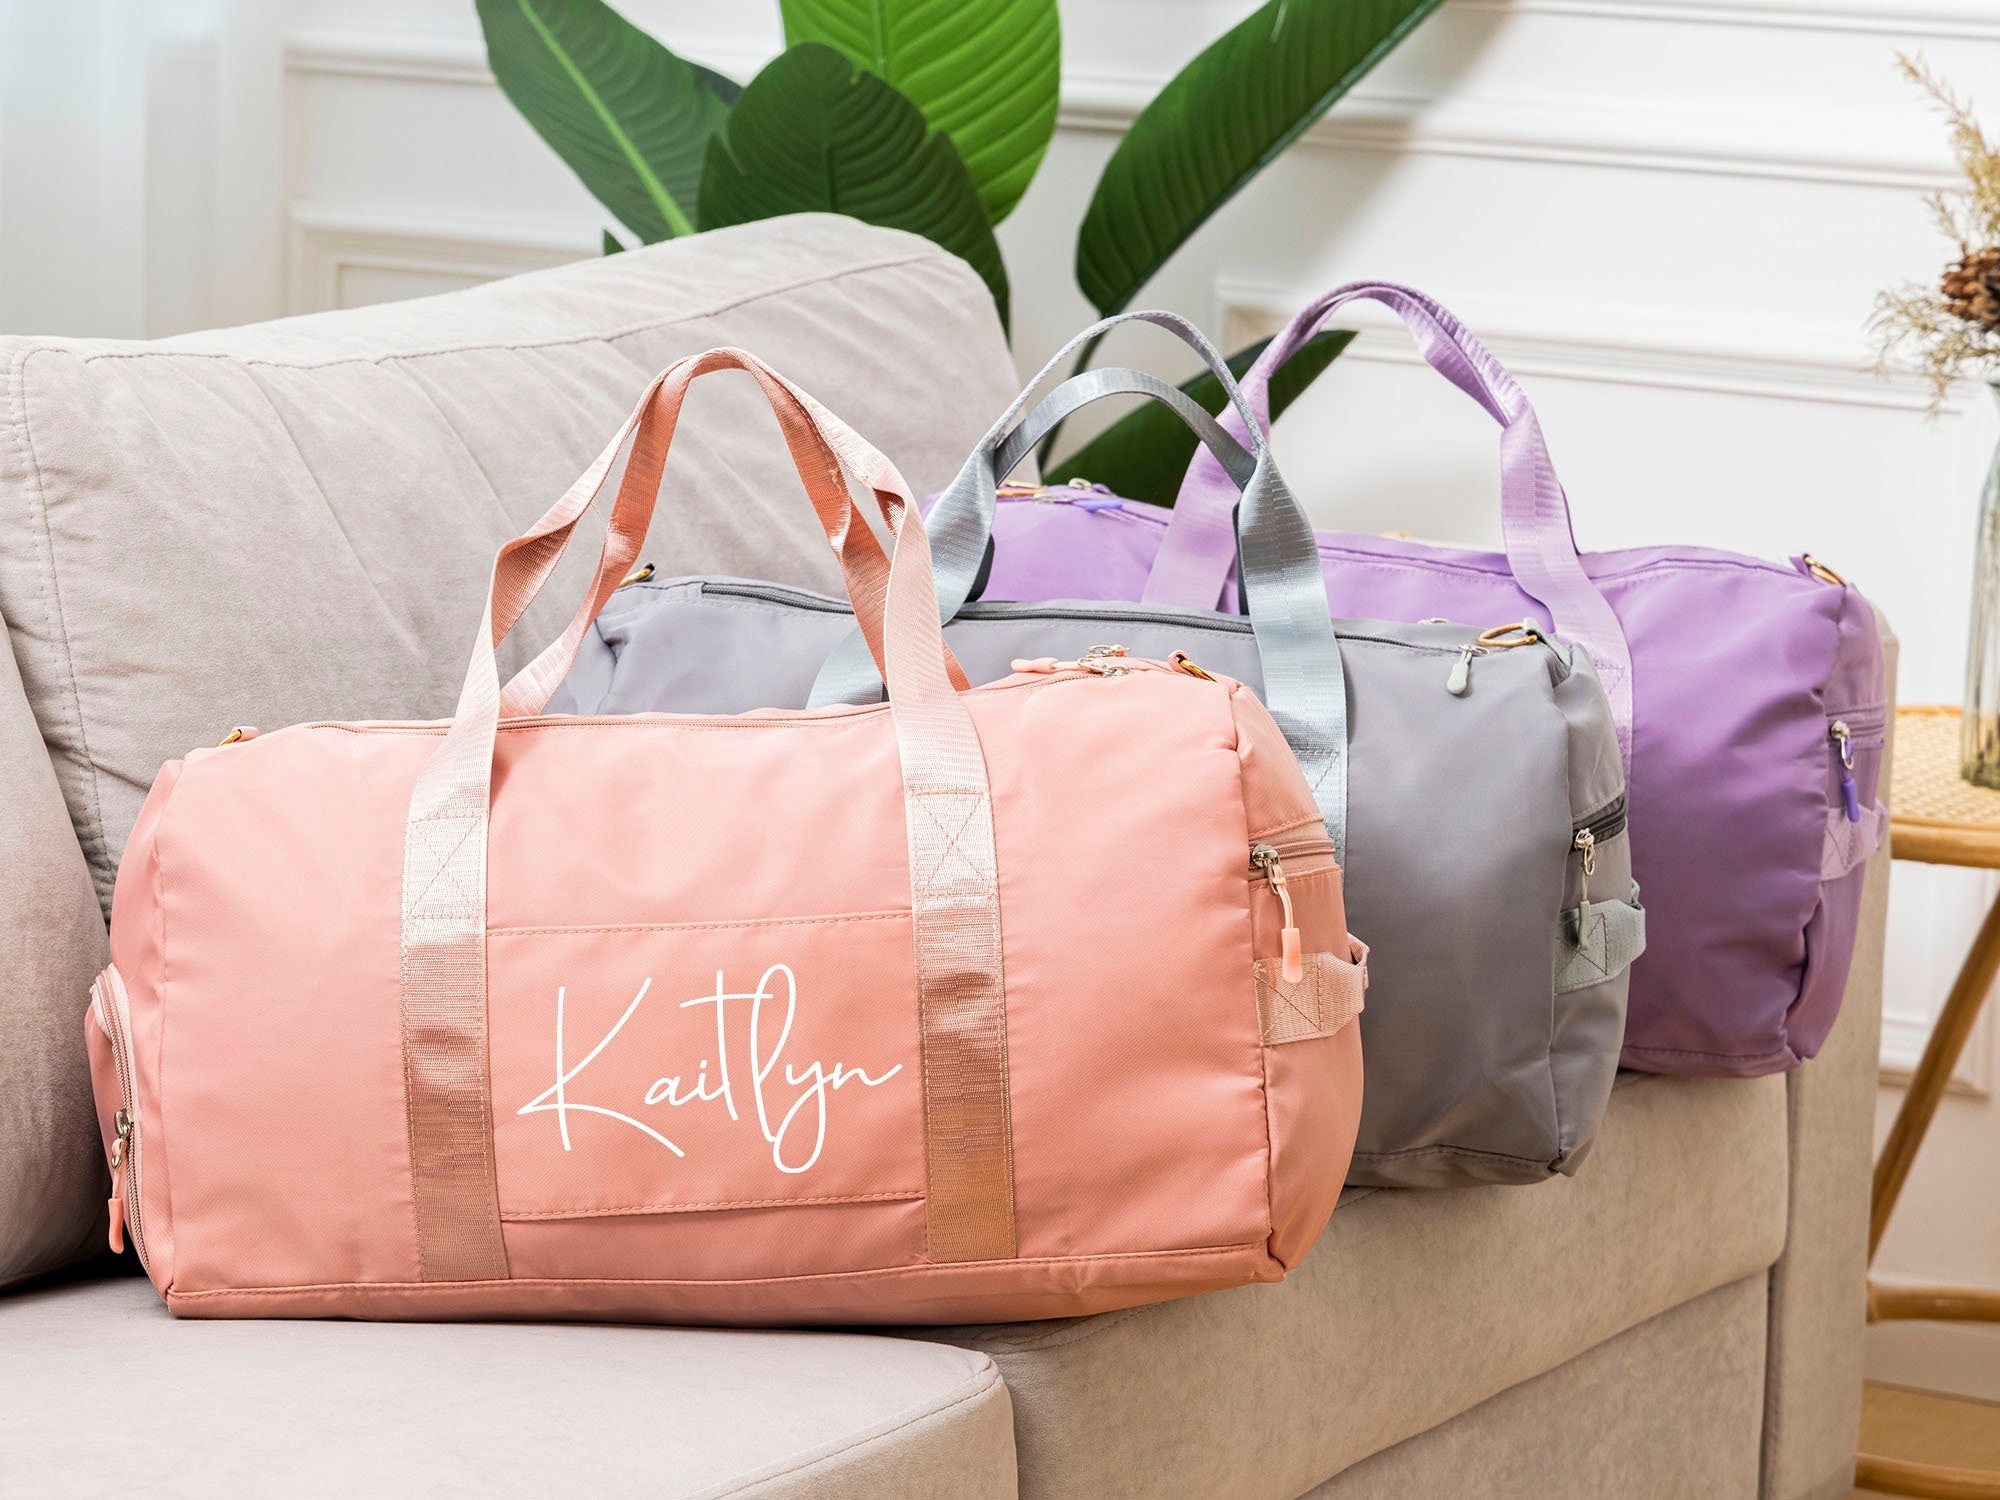 The Cutest Overnight Bags Youll Want for All Your Summer Adventures   StyleCaster